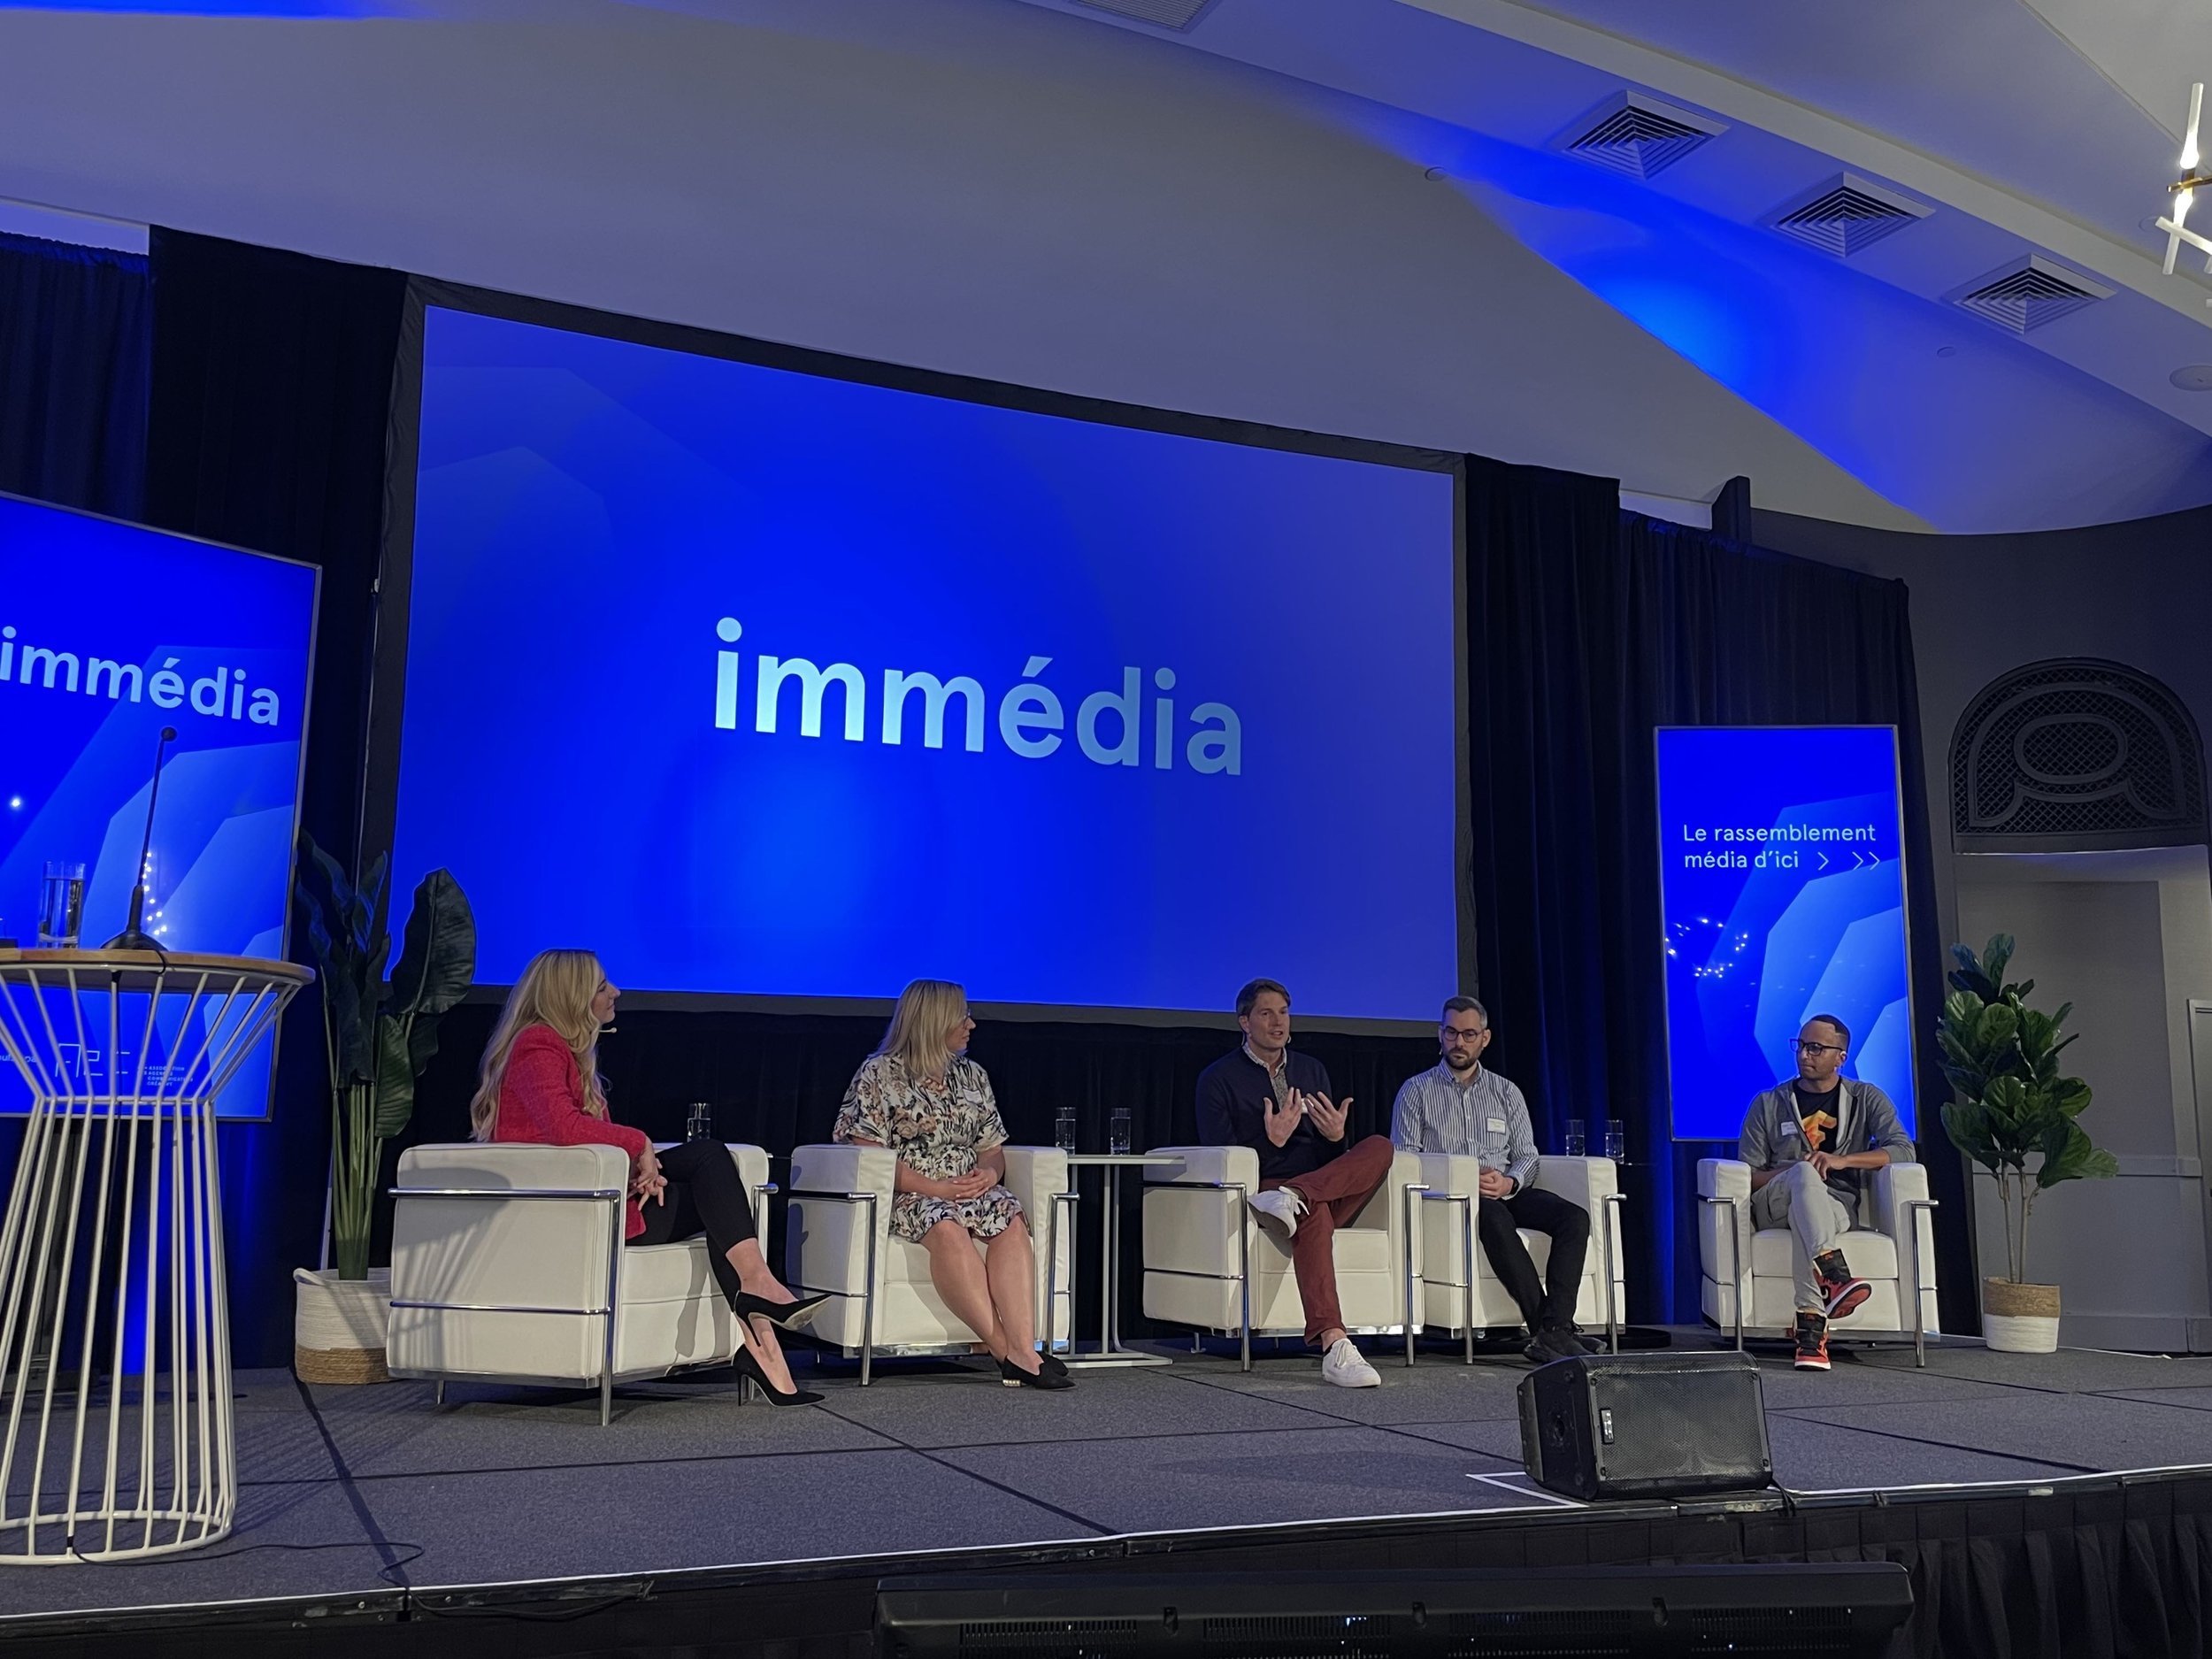 Media Planning present at the Immedia 2022 event